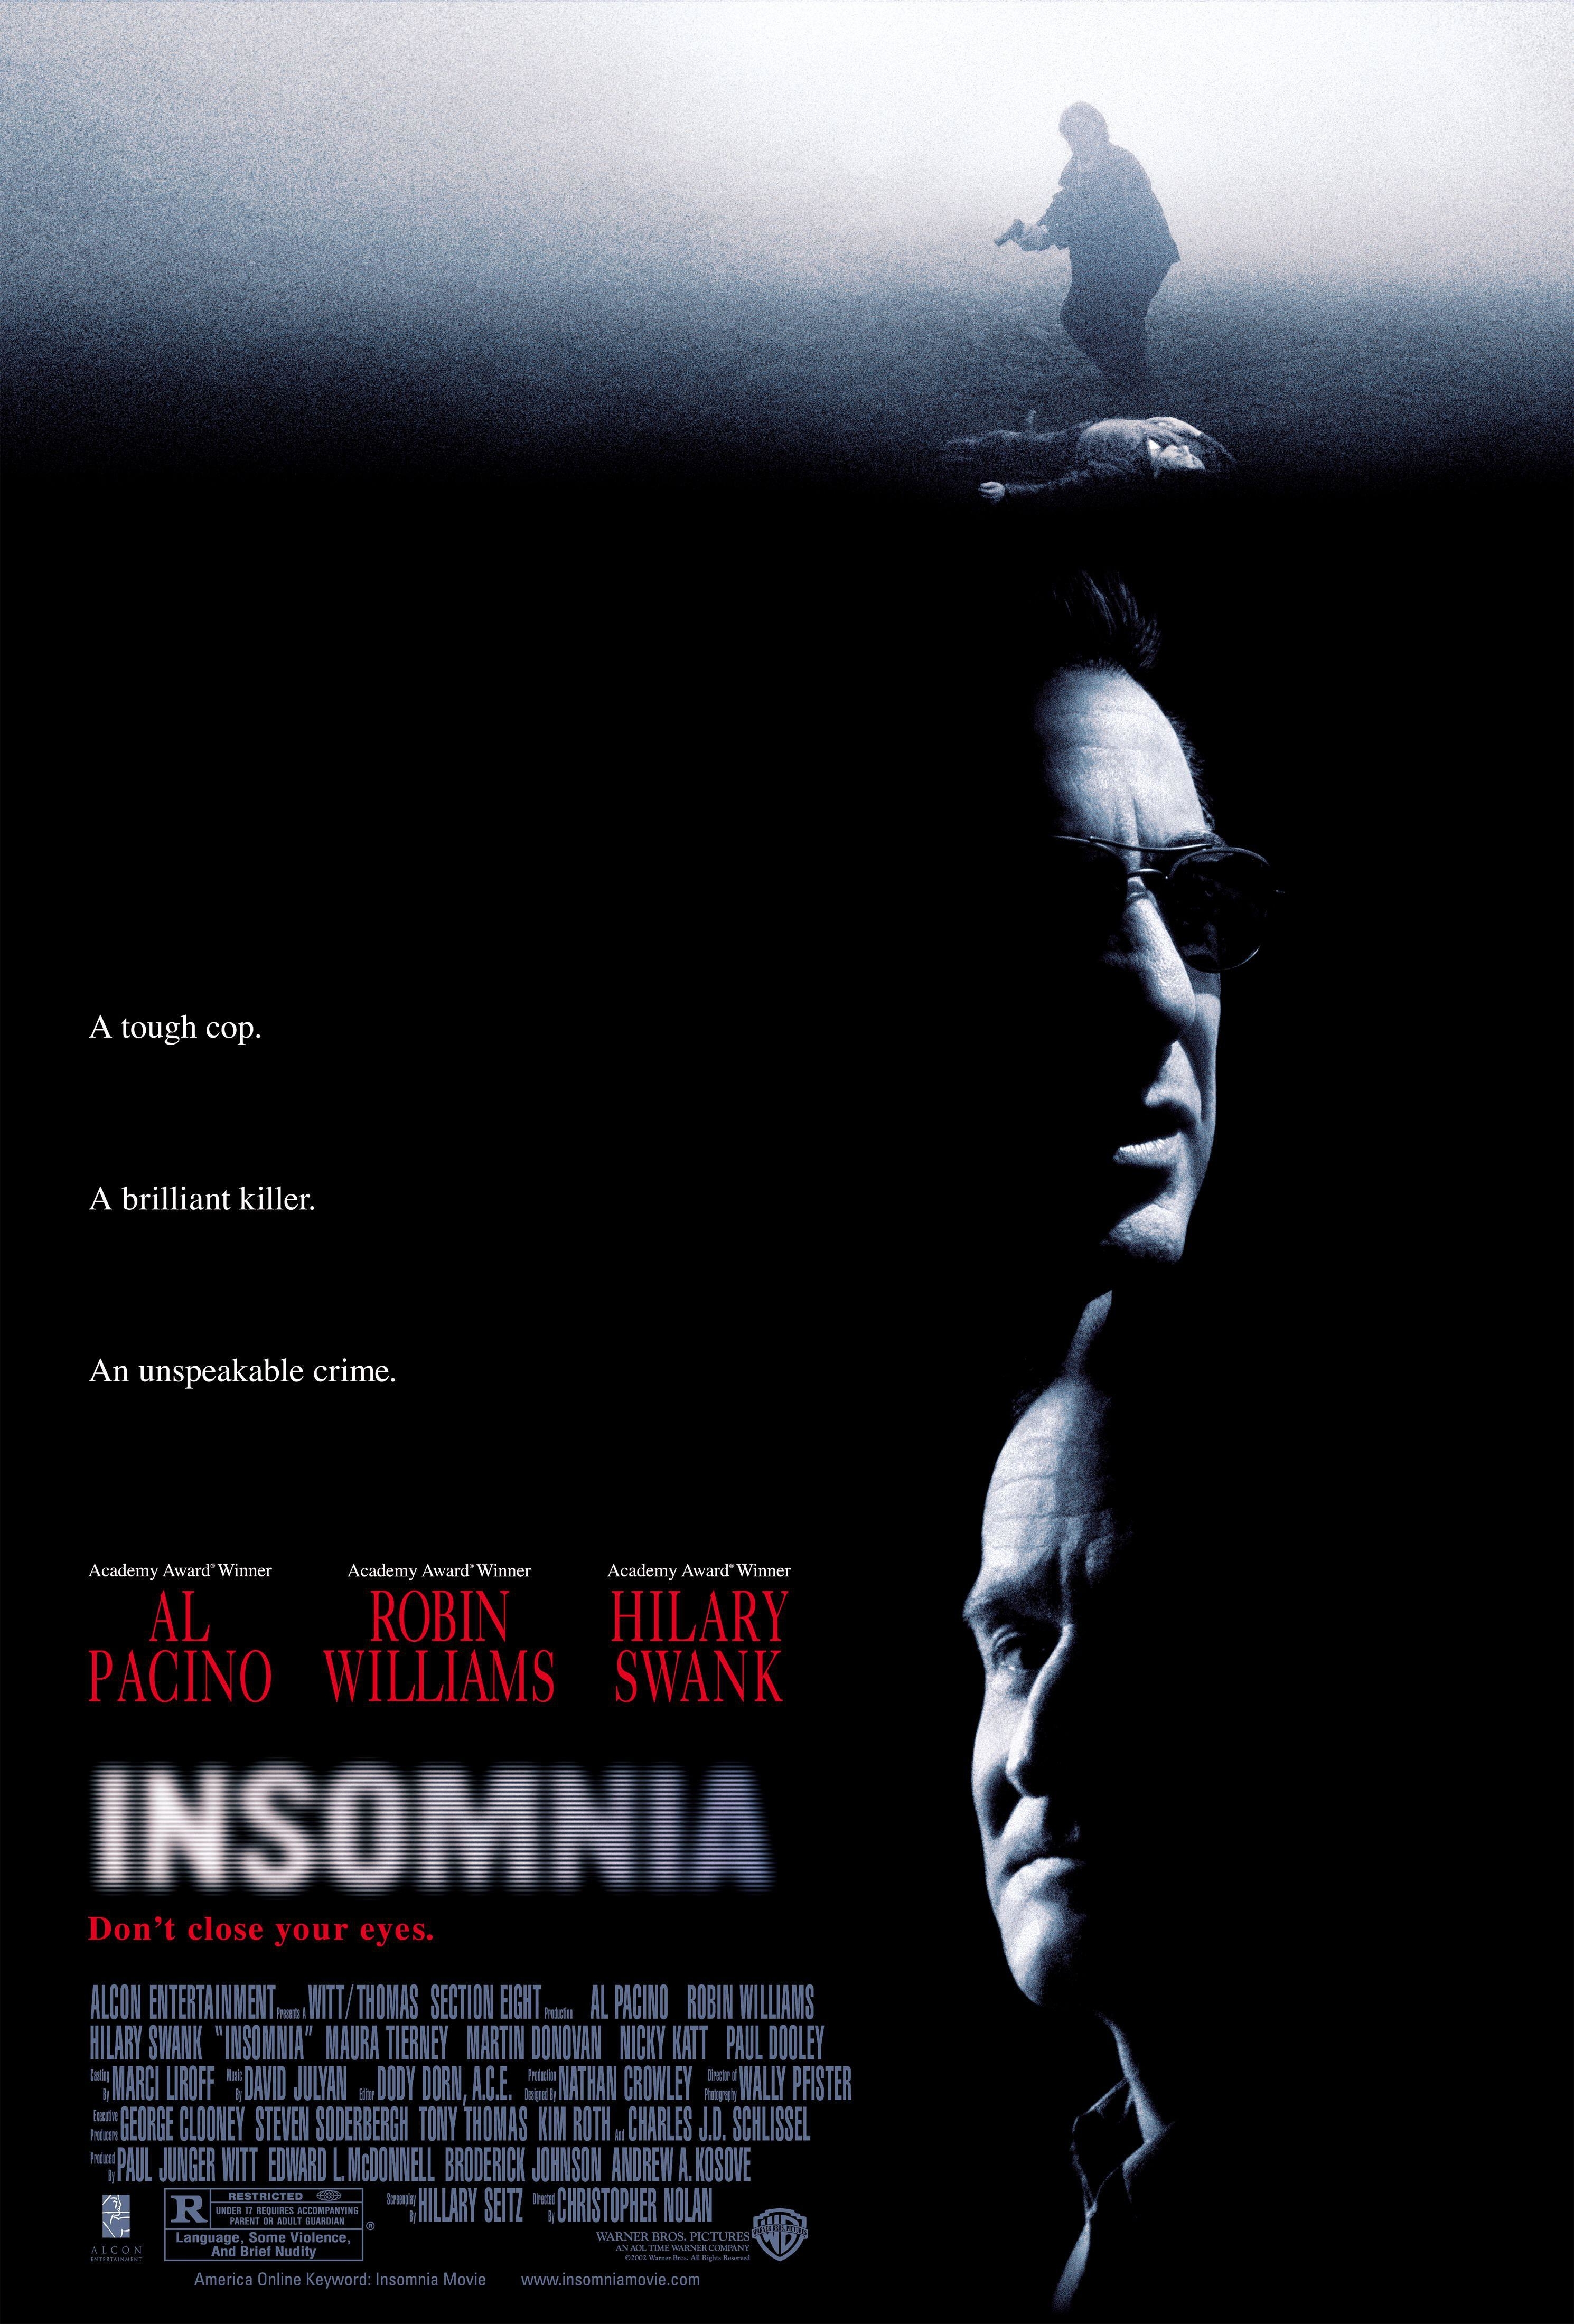 A dark Insomnia movie poster featuring silhouettes of Al Pacino and Robin Williams.